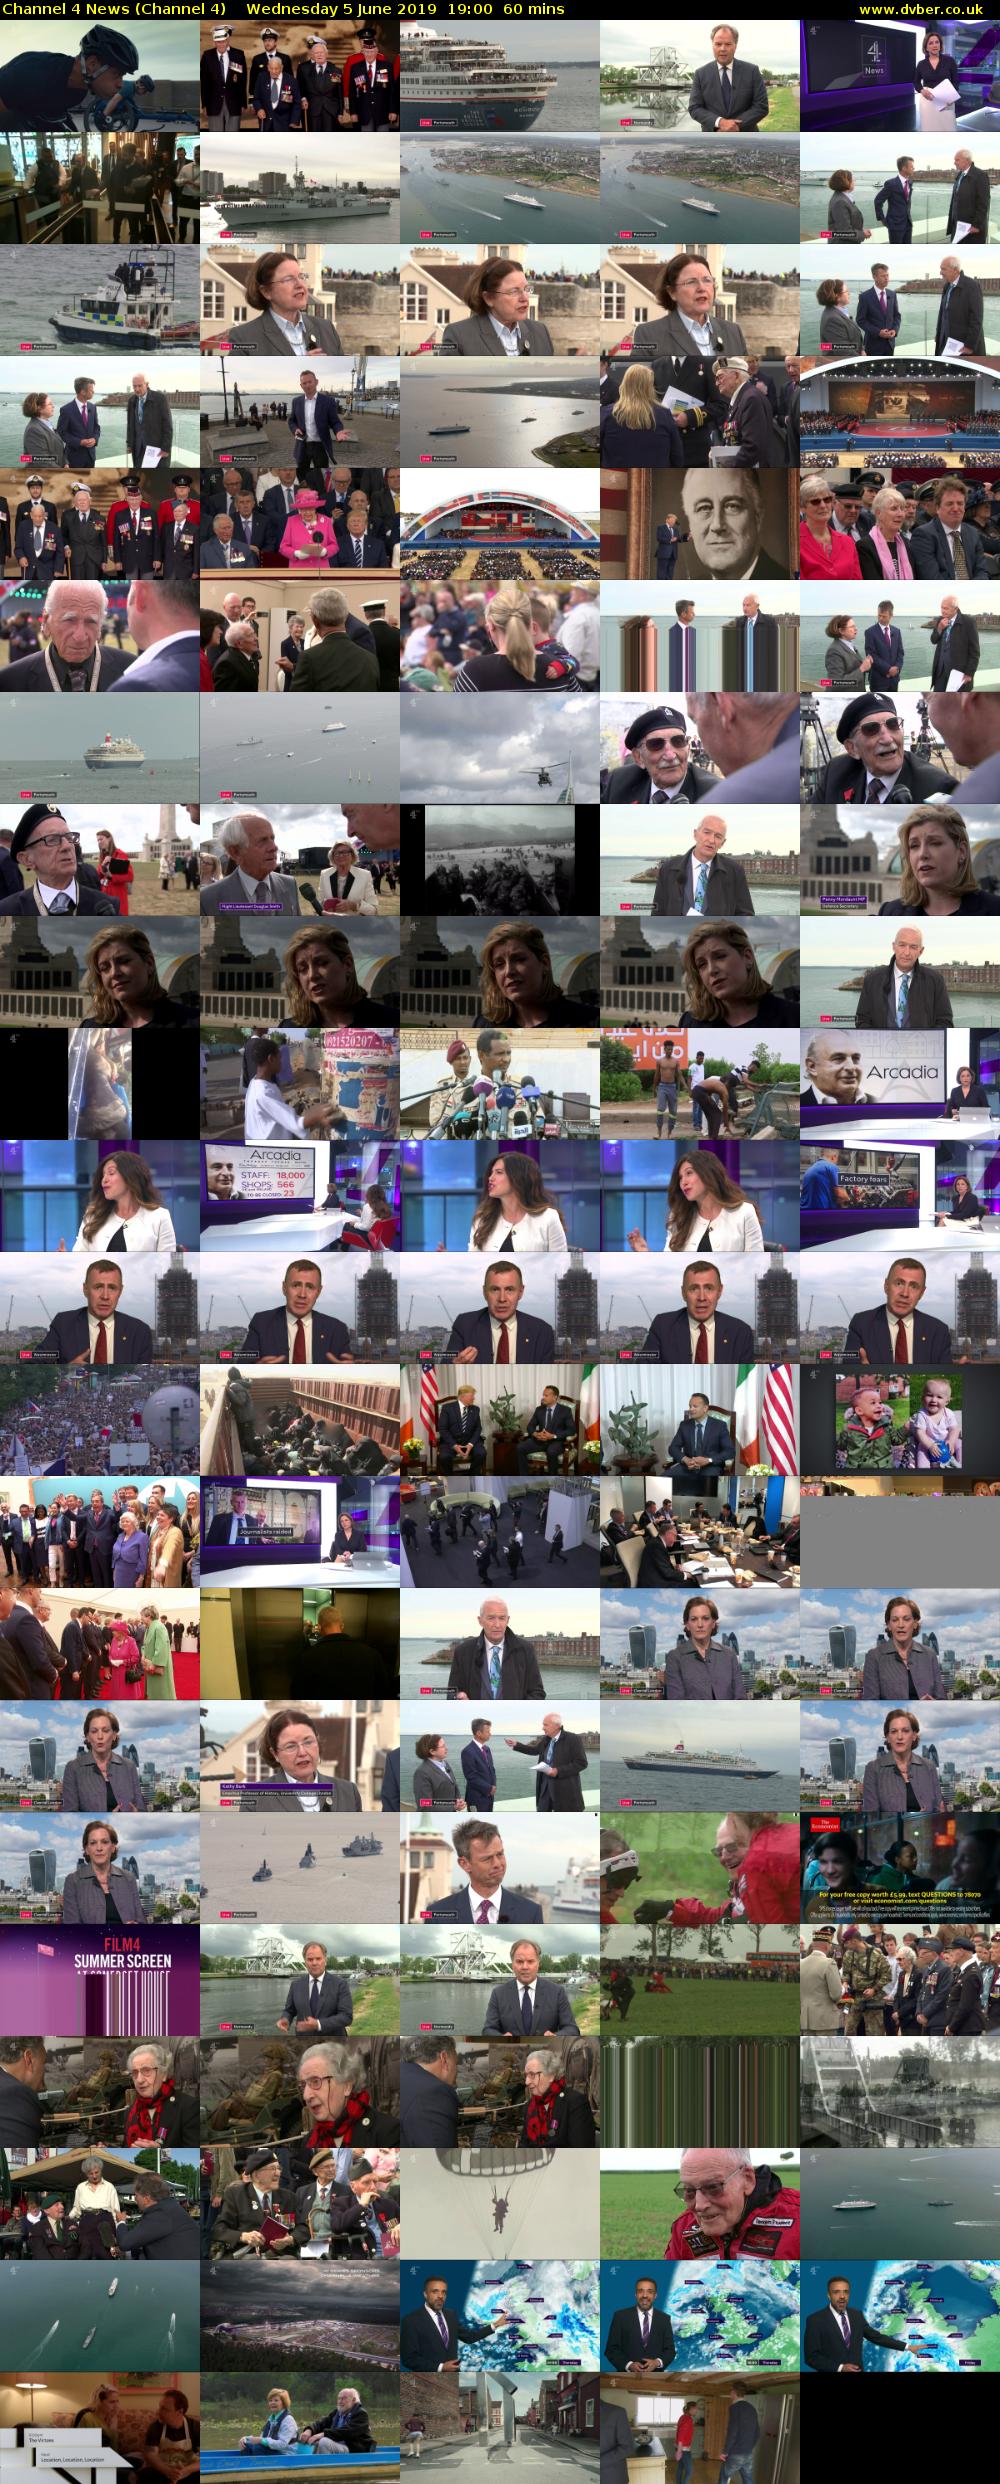 Channel 4 News (Channel 4) Wednesday 5 June 2019 19:00 - 20:00